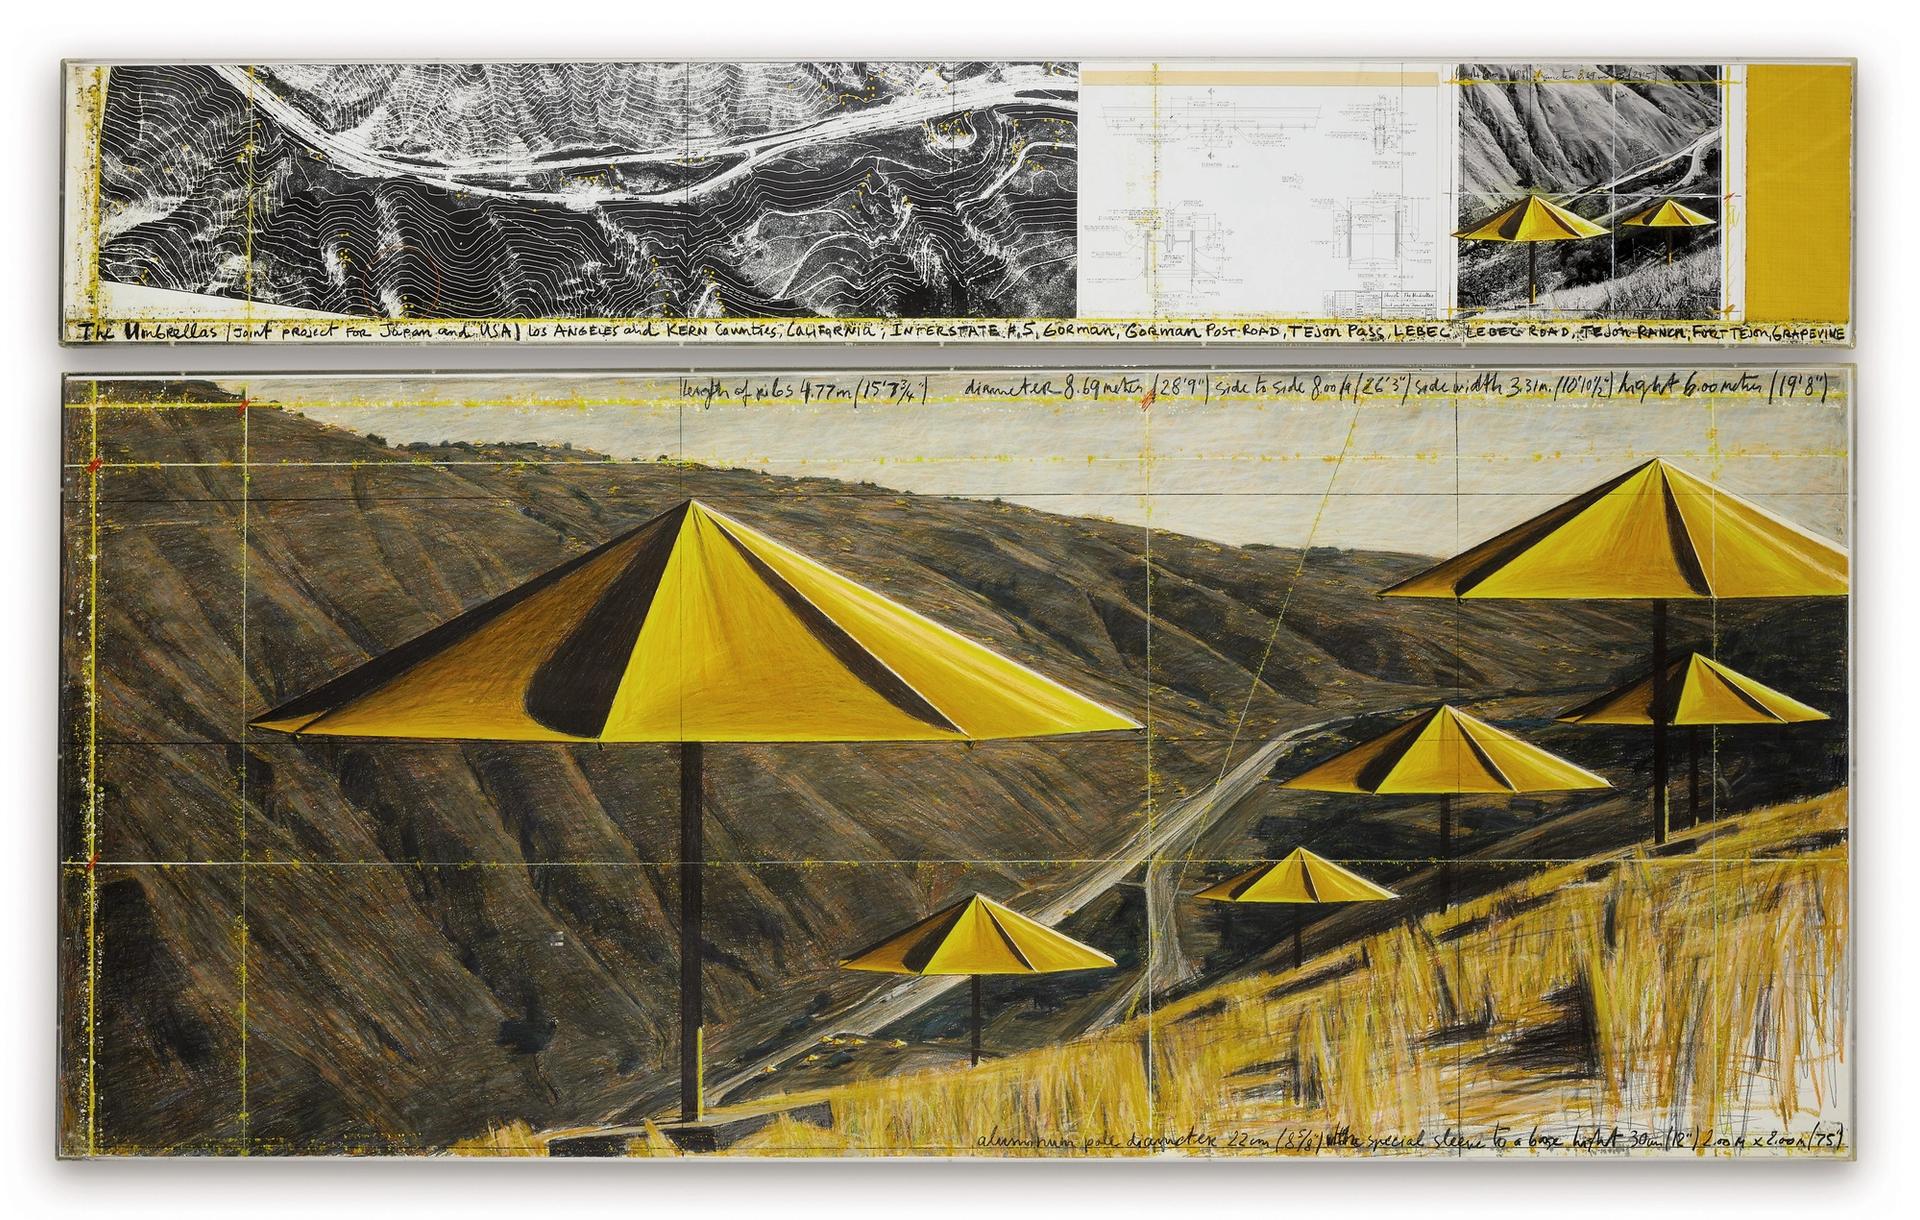 A drawing by Christo for his The Umbrellas (Joint project for Japan and USA), (1991), sold for €1.7m at Sotheby's in Paris, setting a world auction record for the artist 